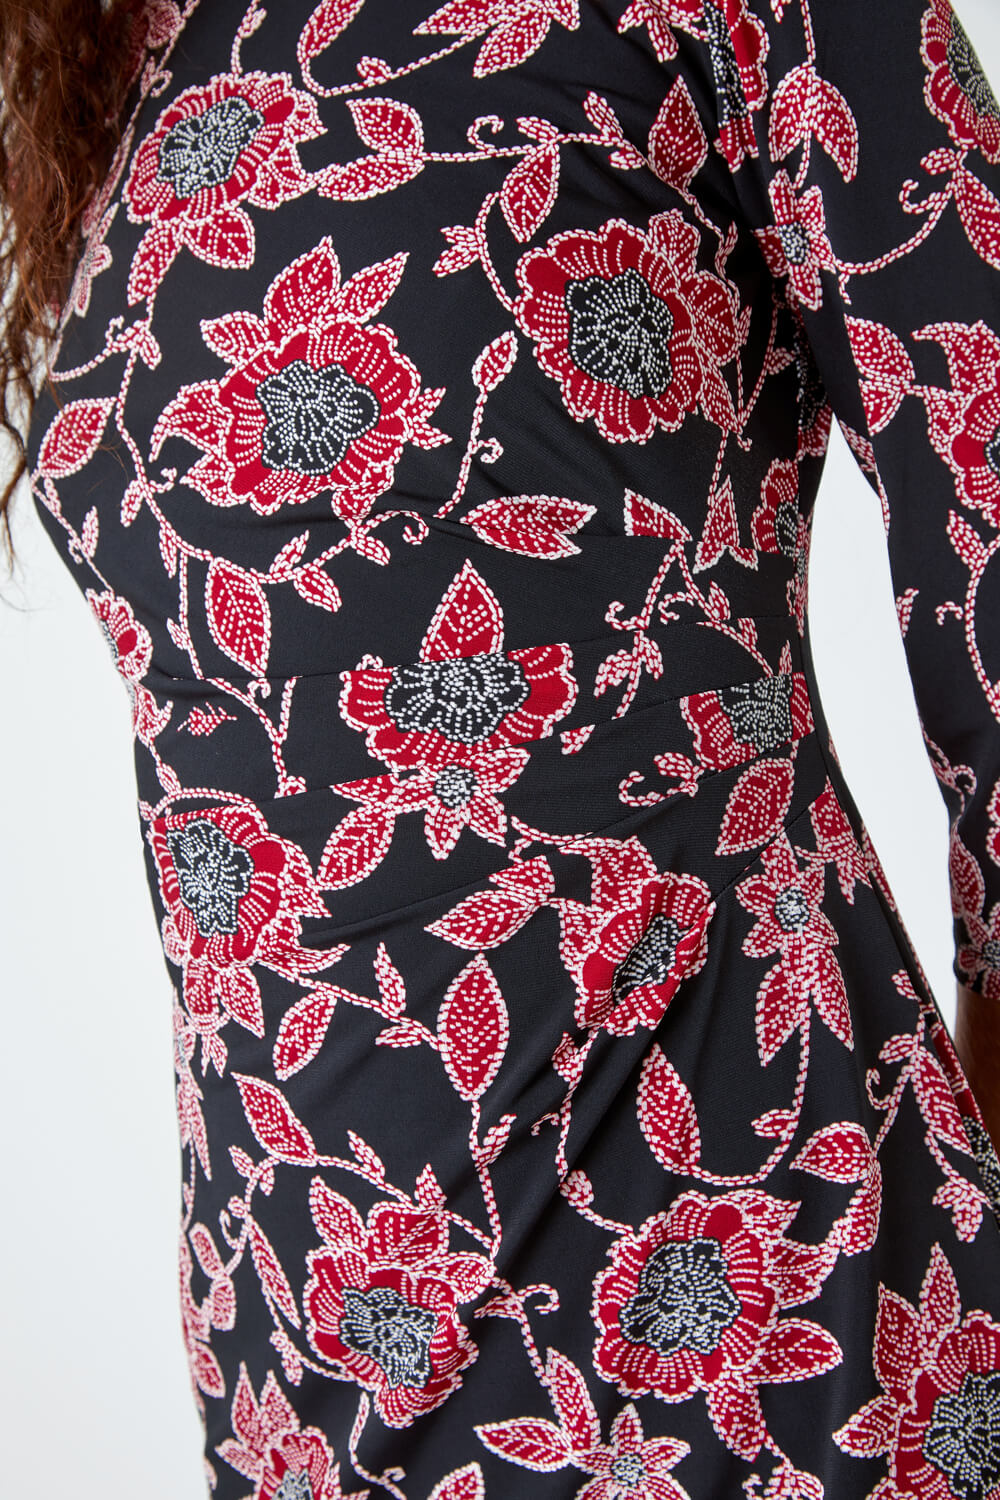 Red Floral Print Ruched Waist Stretch Dress, Image 5 of 5